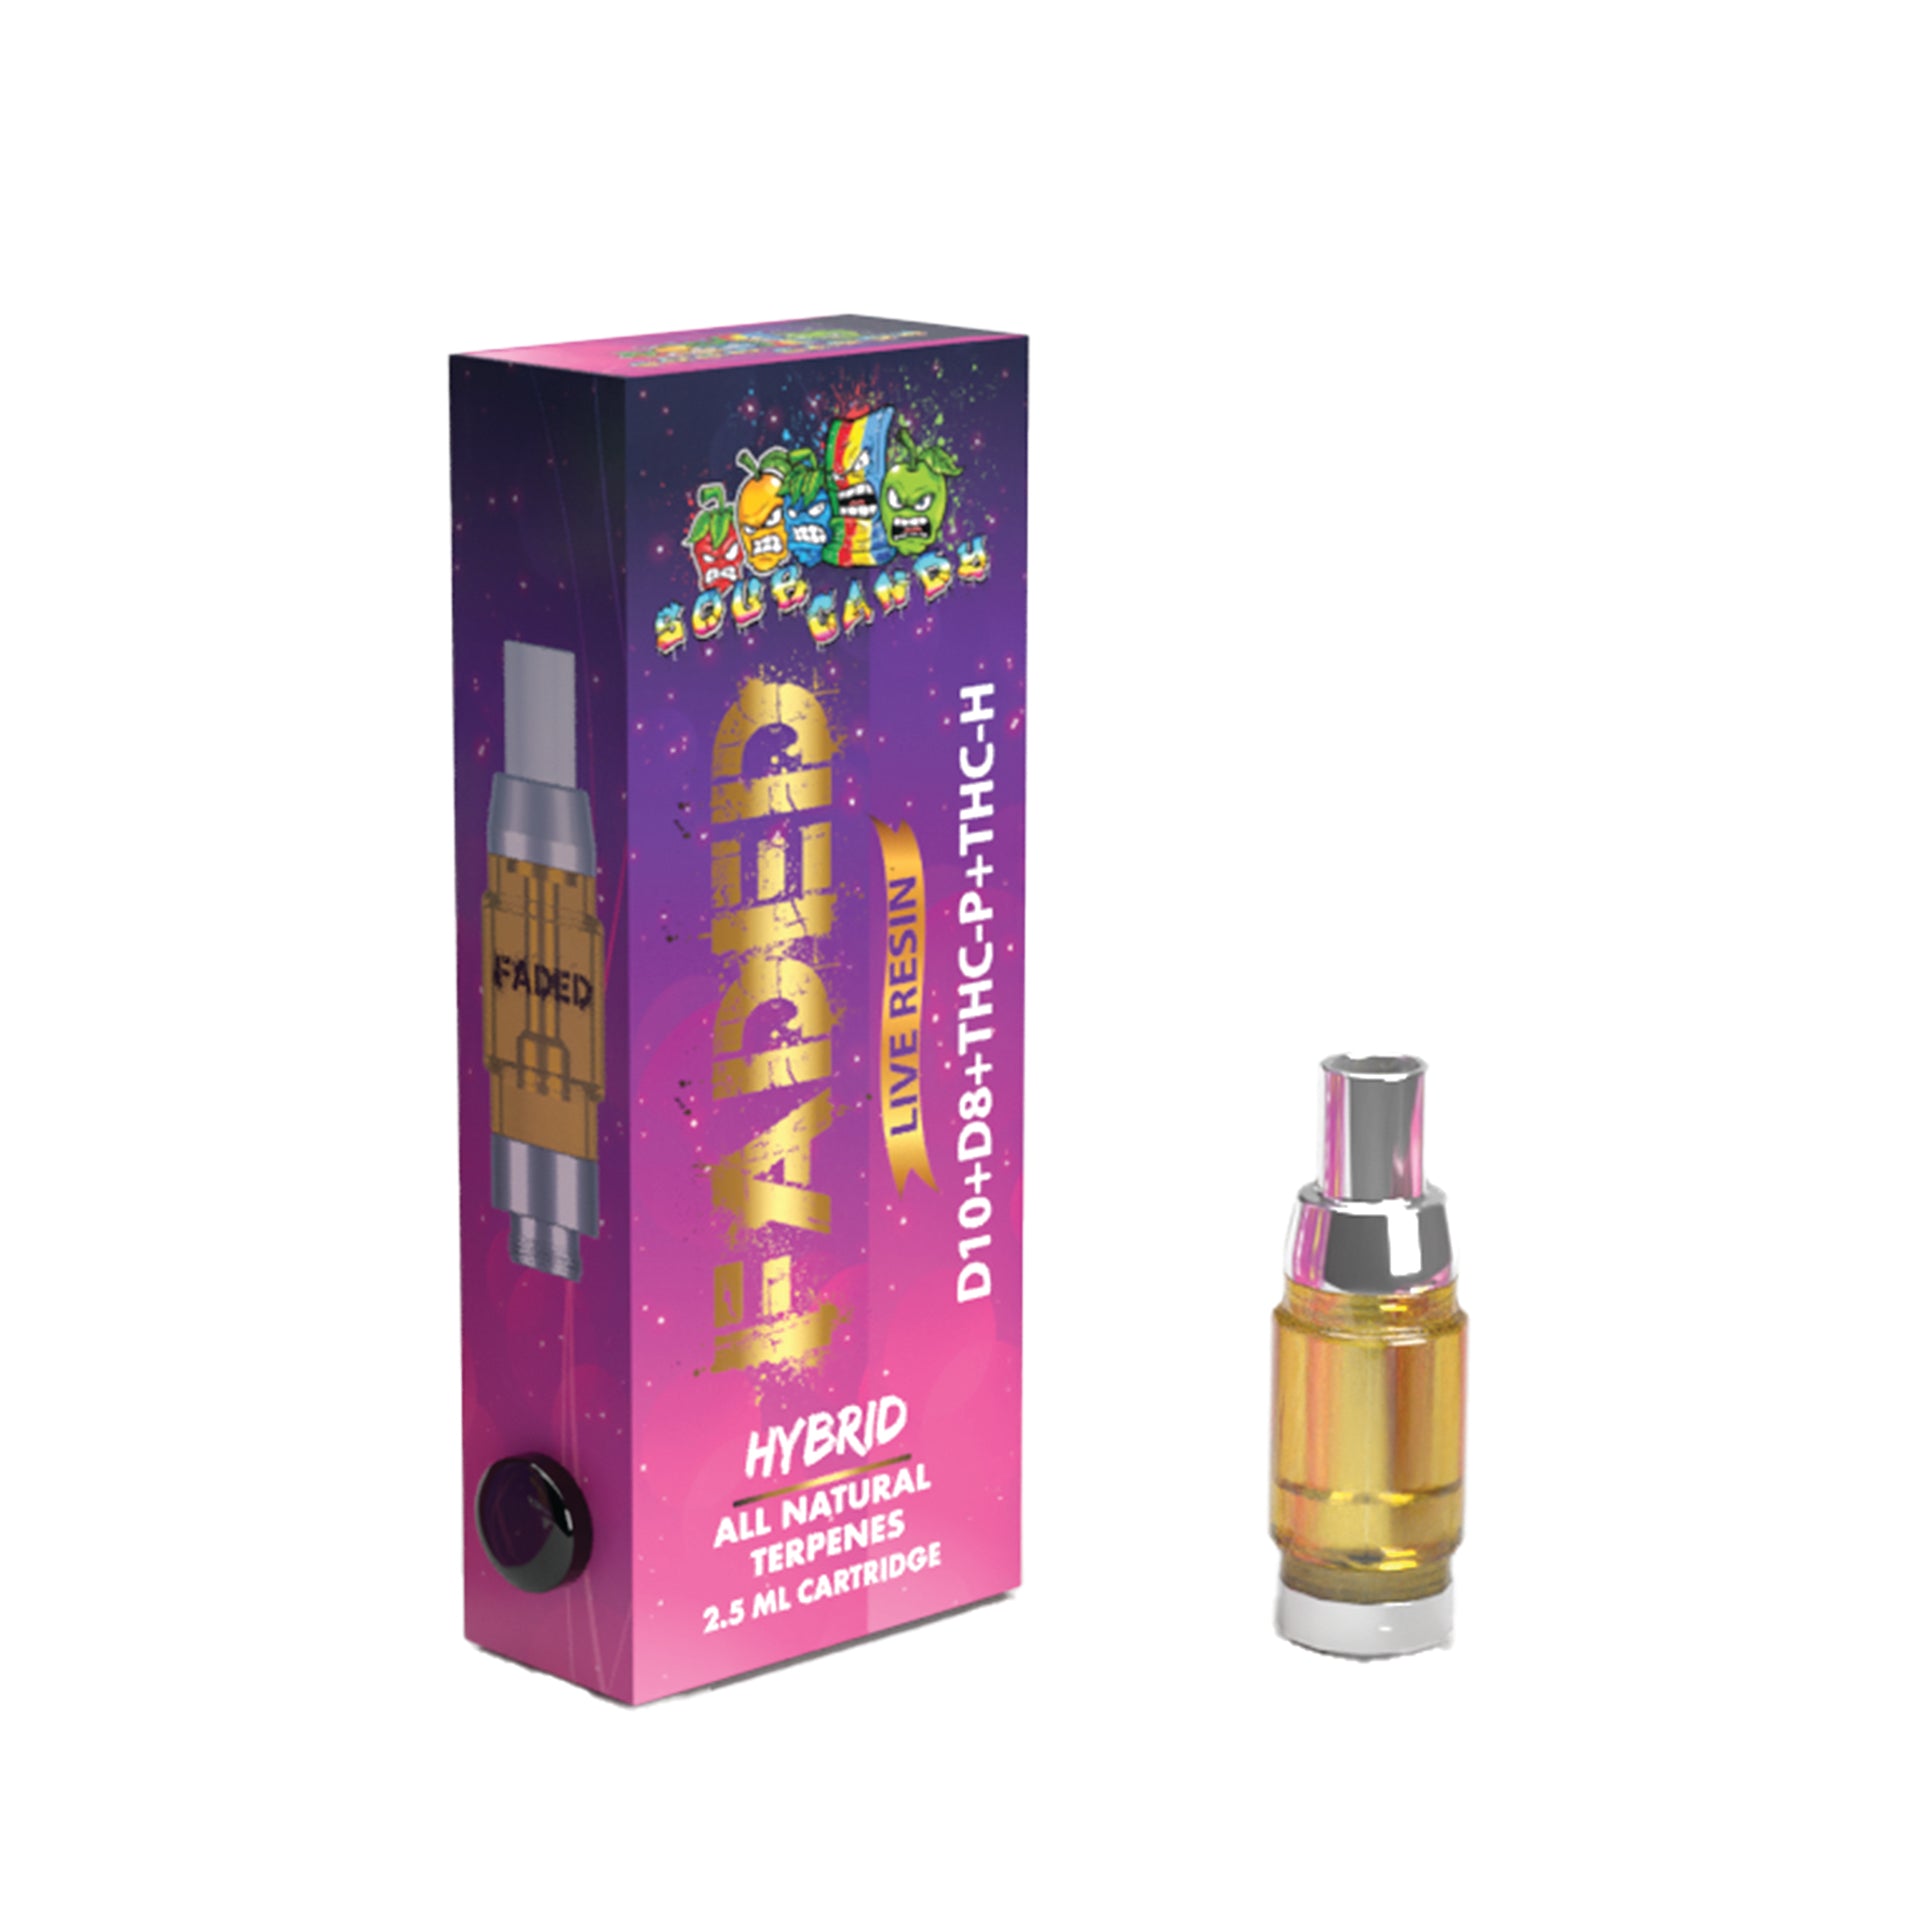 FADED D-10+D-8+THC-P+THC-H LIVE RESIN RECHARGEABLE CARTRIDGE - HYBRID SOUR CANDY 2.5ML